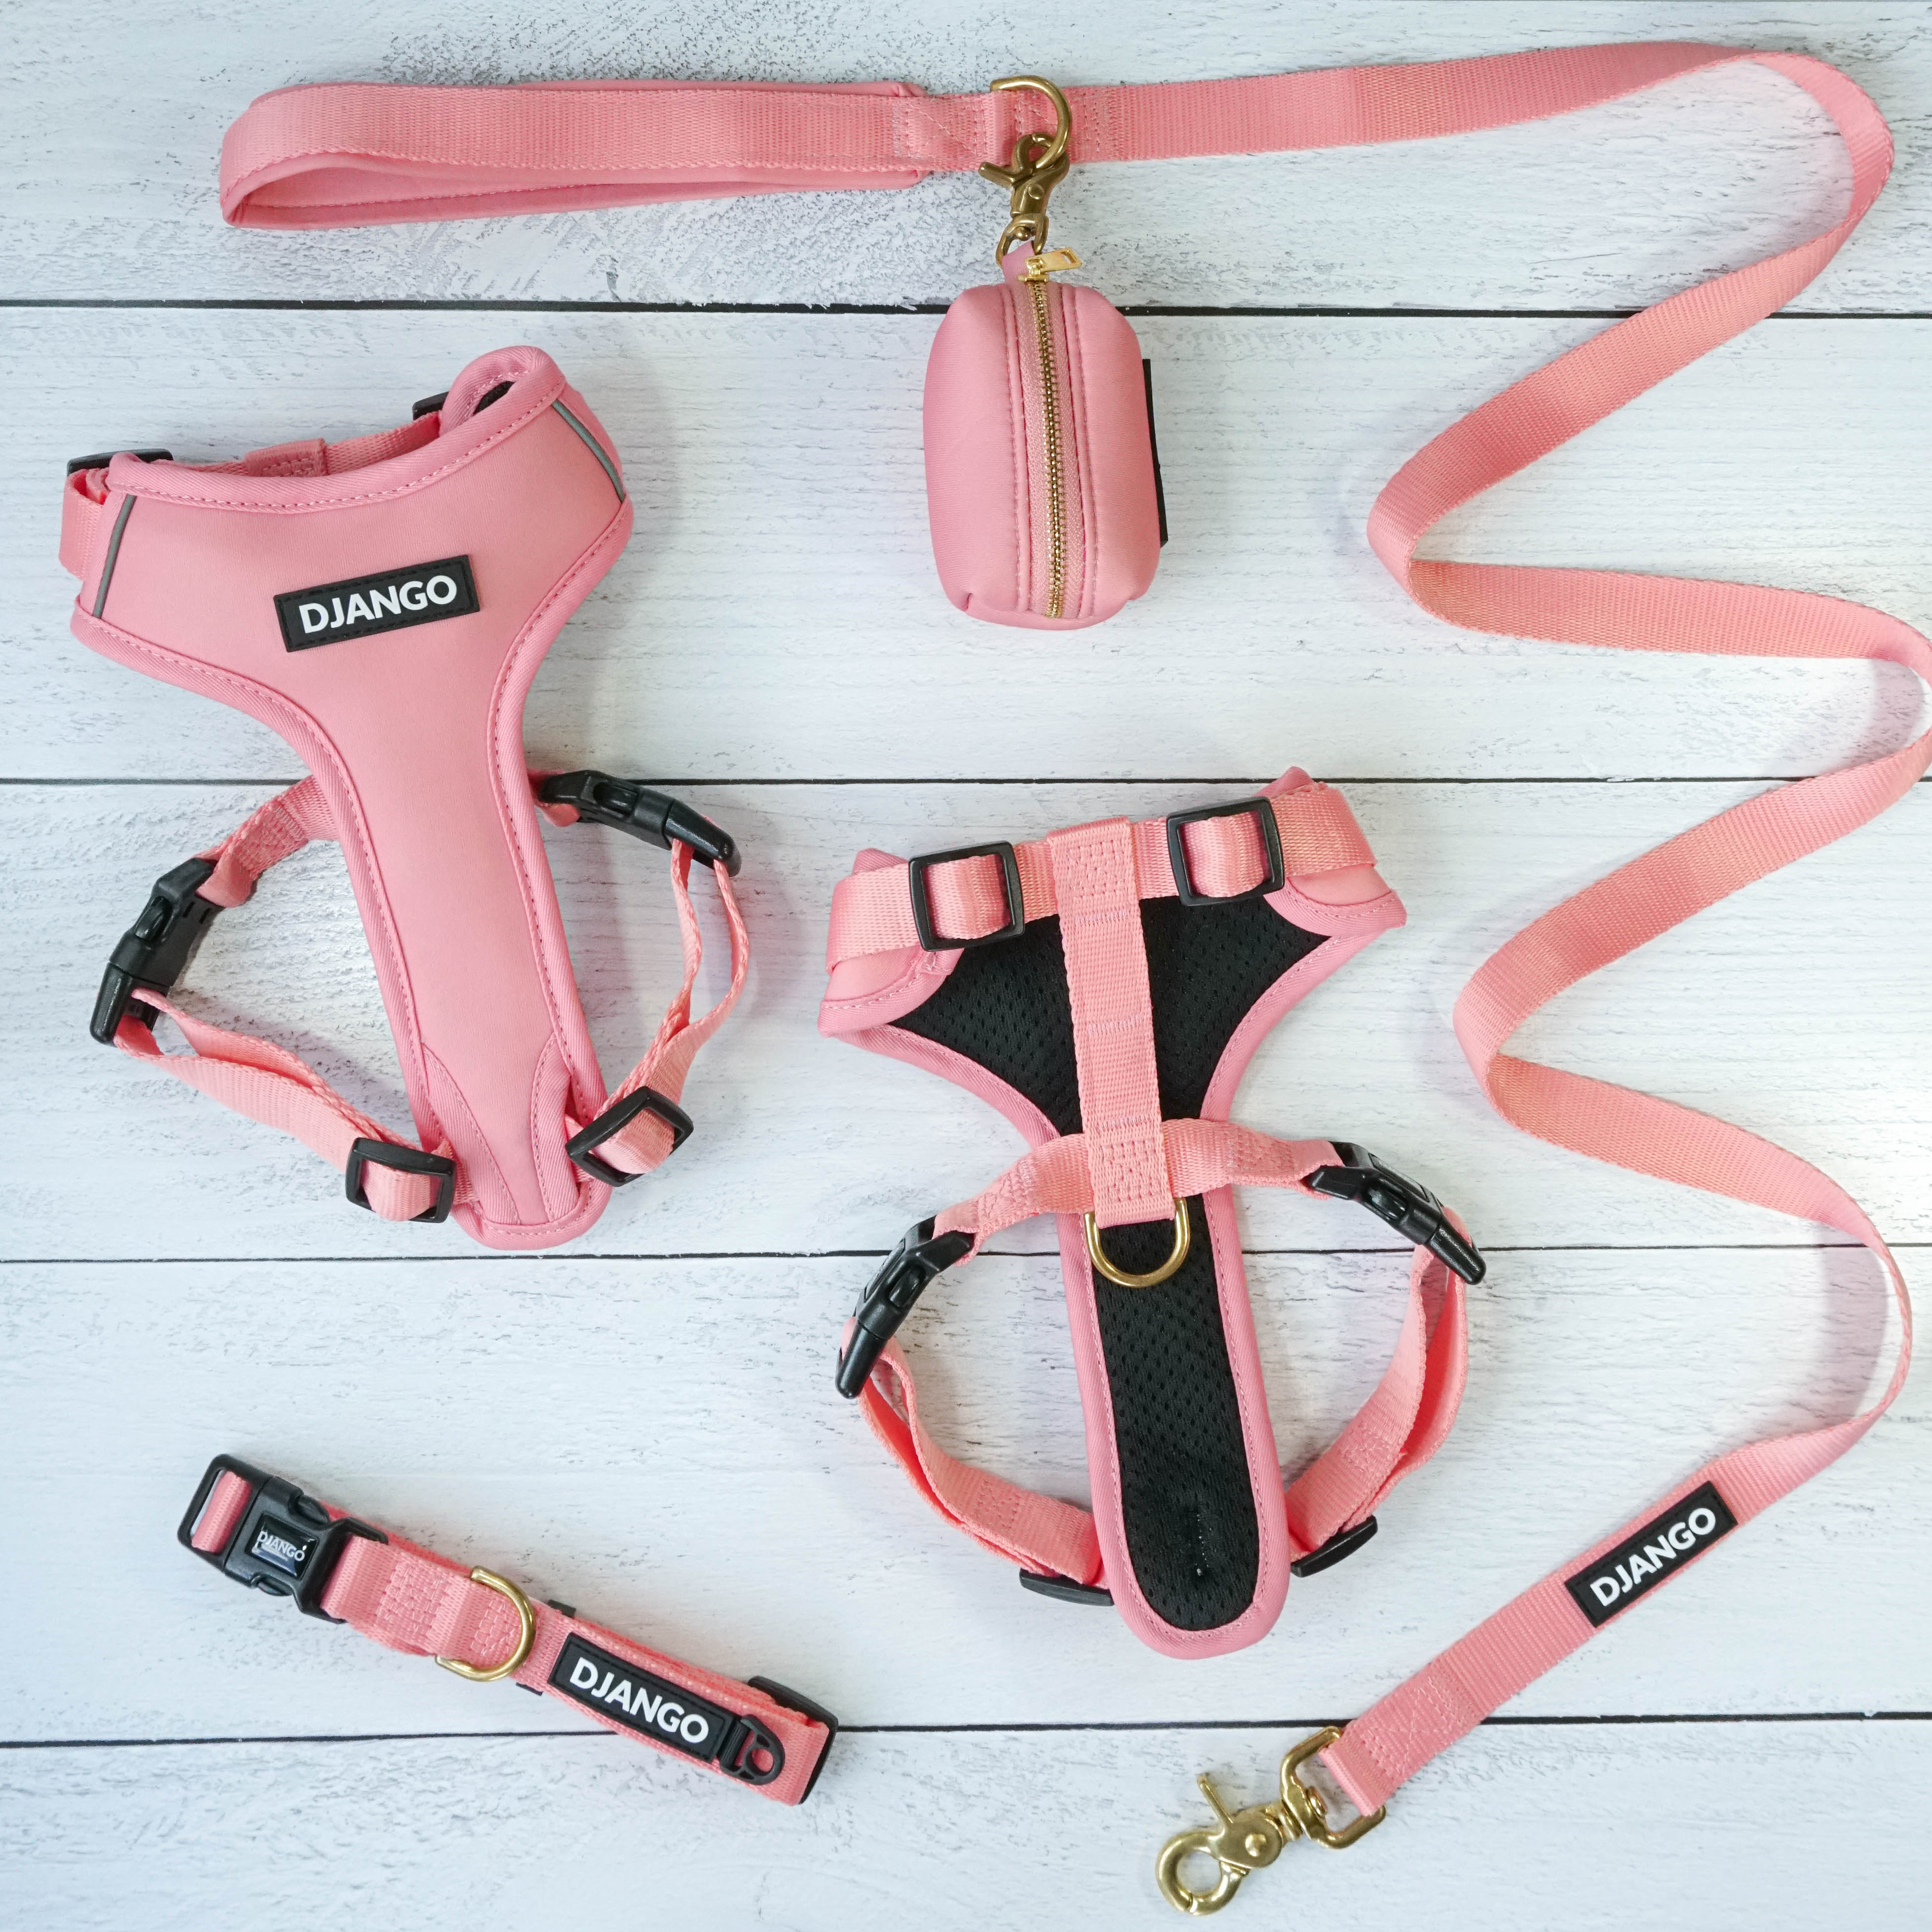 DJANGO Adventure Bundle in Quartz Pink - The Adventure Bundle includes our comfortable, durable, and weather-resistant Adventure Dog Harness, Adventure Dog Collar, Standard Adventure Dog Leash, and chic Waste Bag Holder. All items feature high-strength and corrosion-resistant solid brass hardware. Save $$$ when you complete your set and order the Adventure Bundle - djangobrand.com